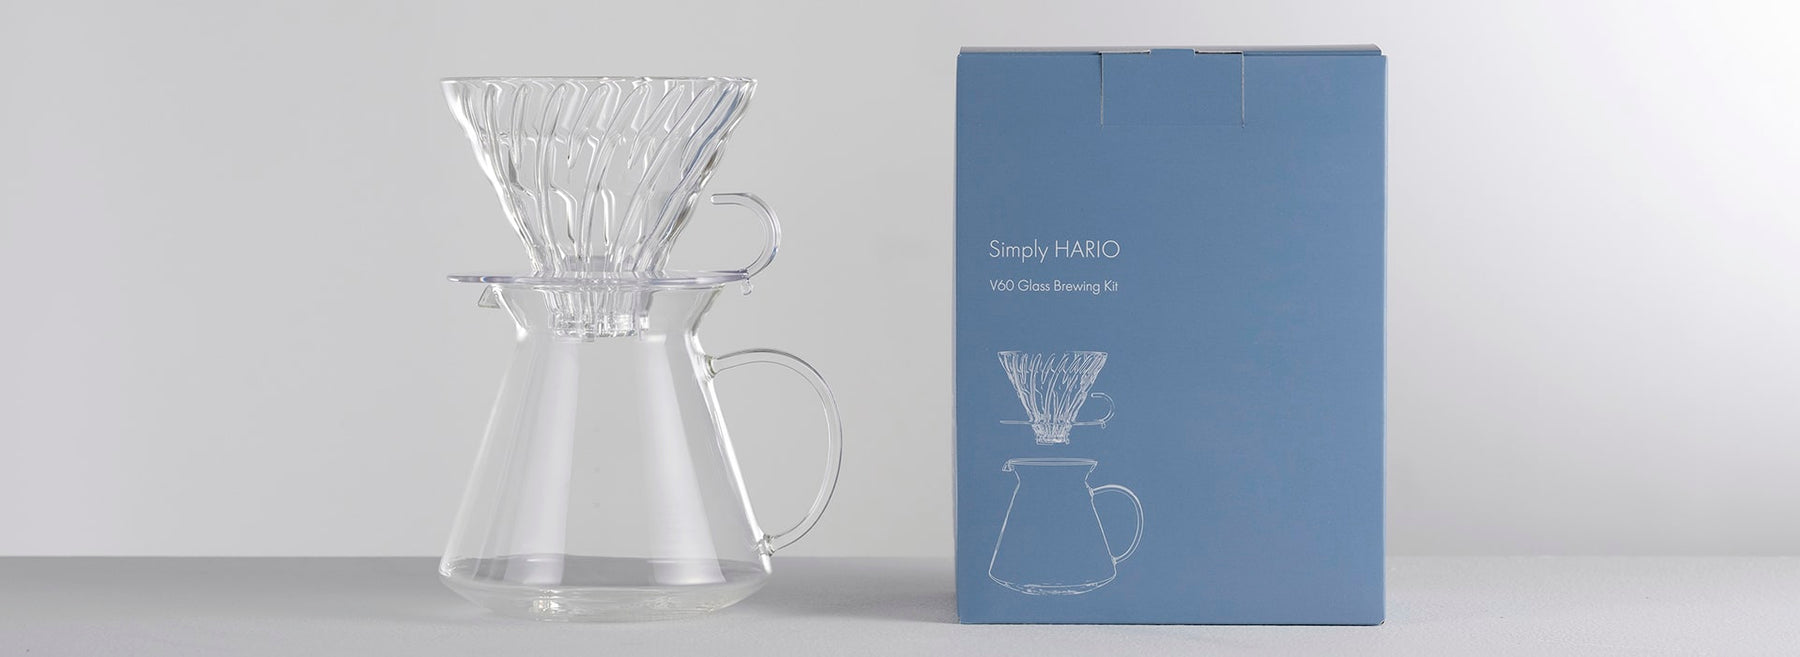 Simply Hario - V60 Glass Brewing Kit Review